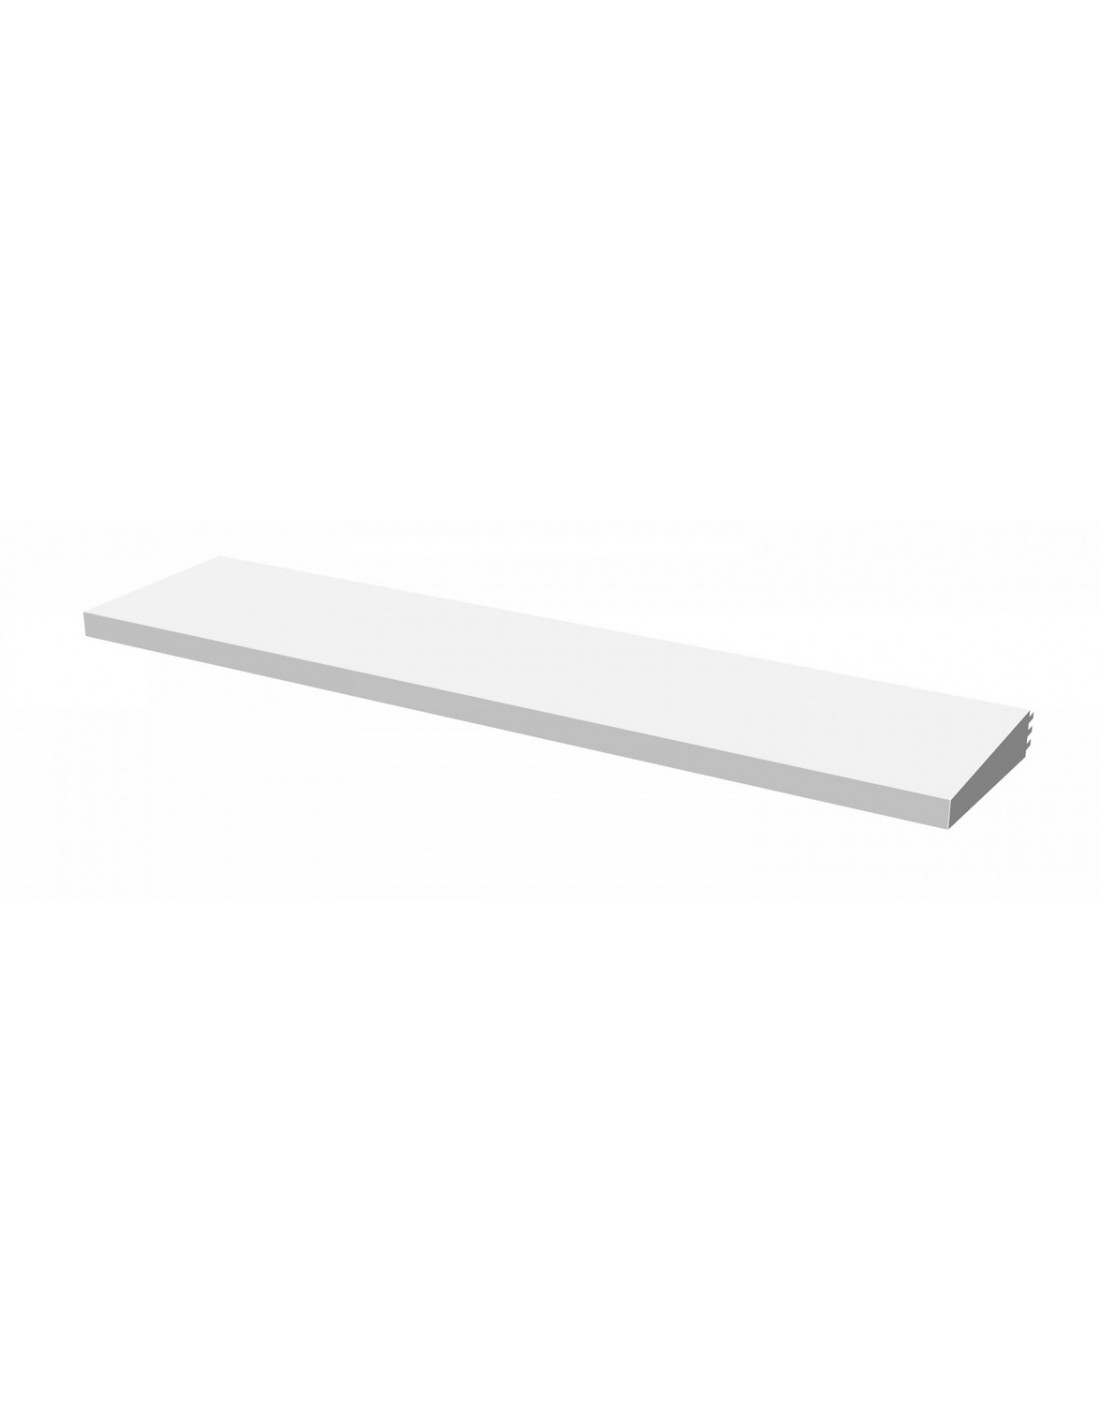 Additional shelf in 100 cm white painted sheet - For mod. VOLCANO 80